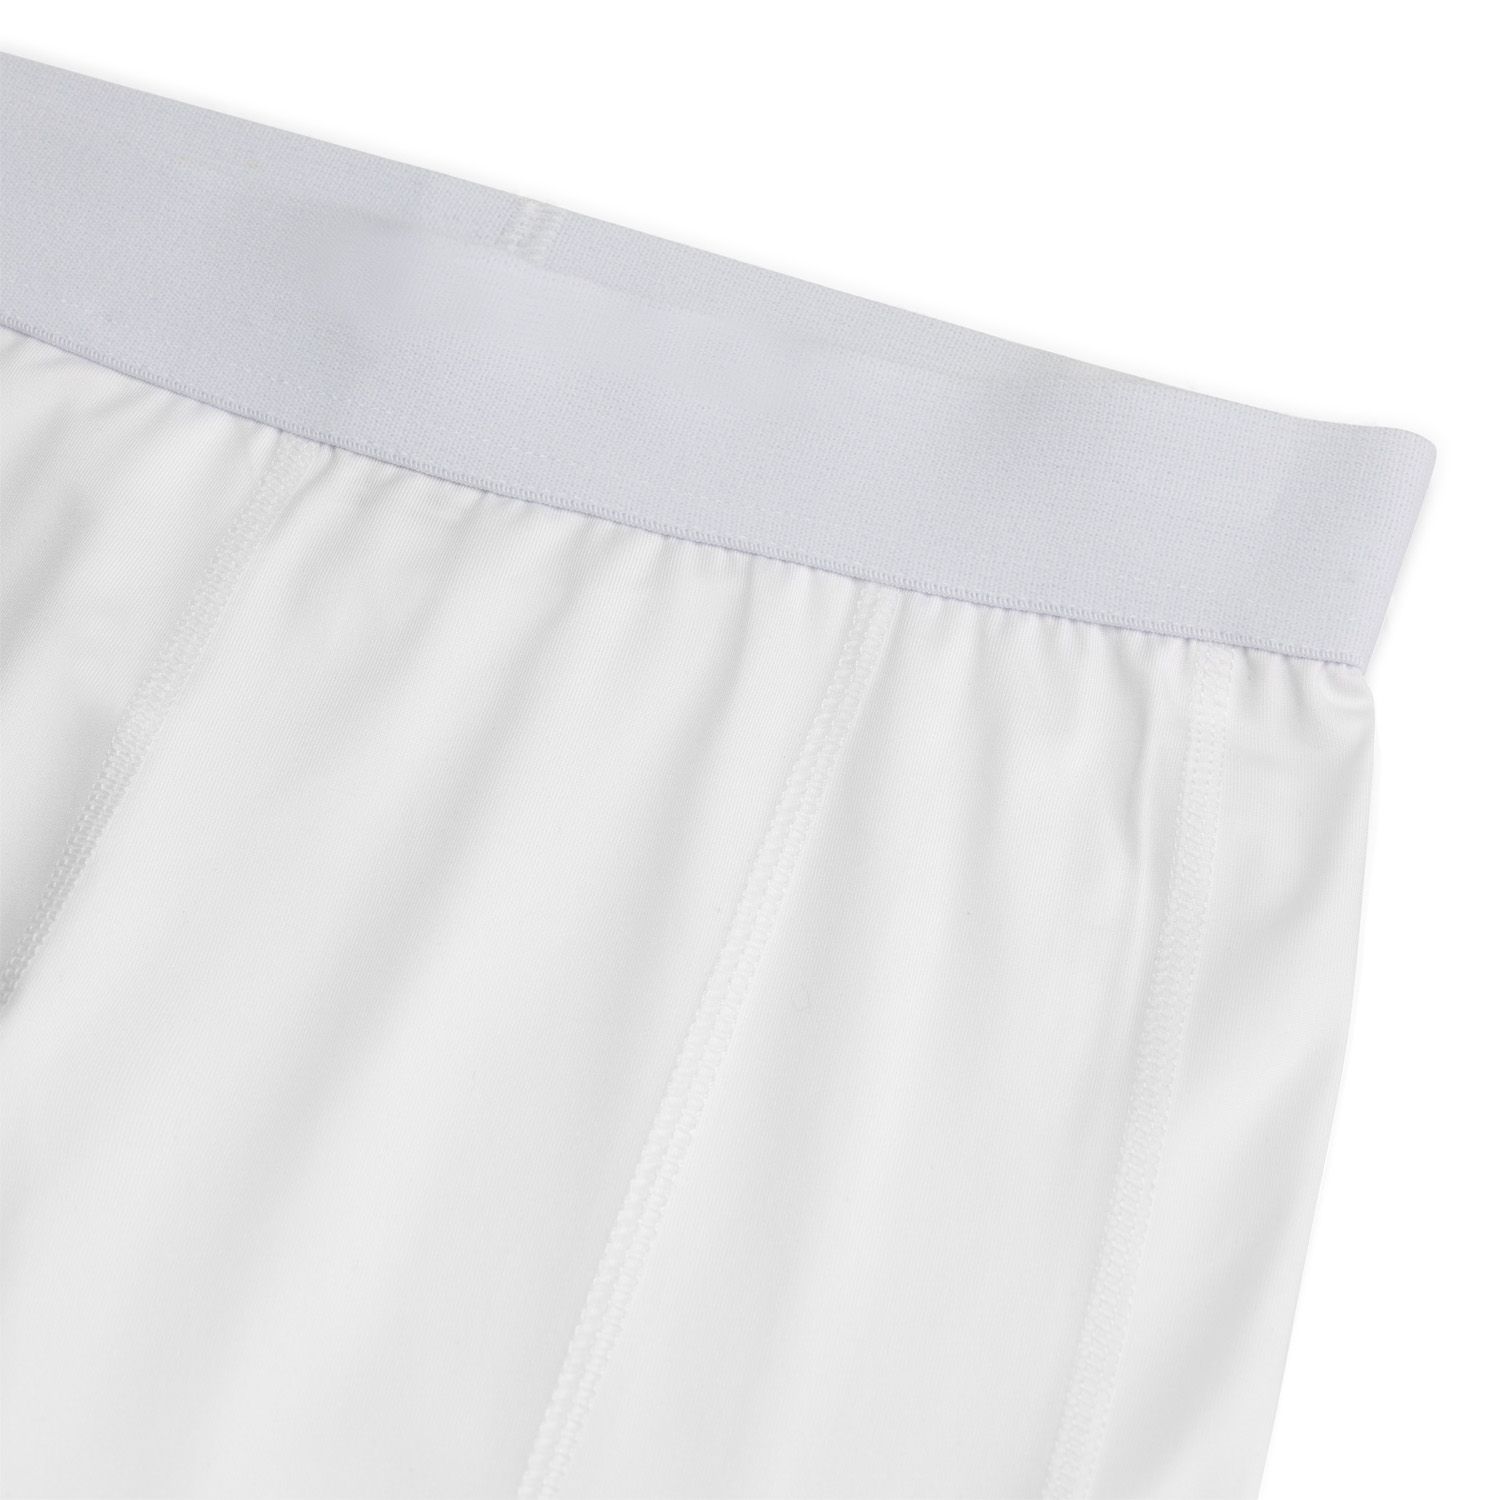 gladiator sports womens compression shorts in white detail photo